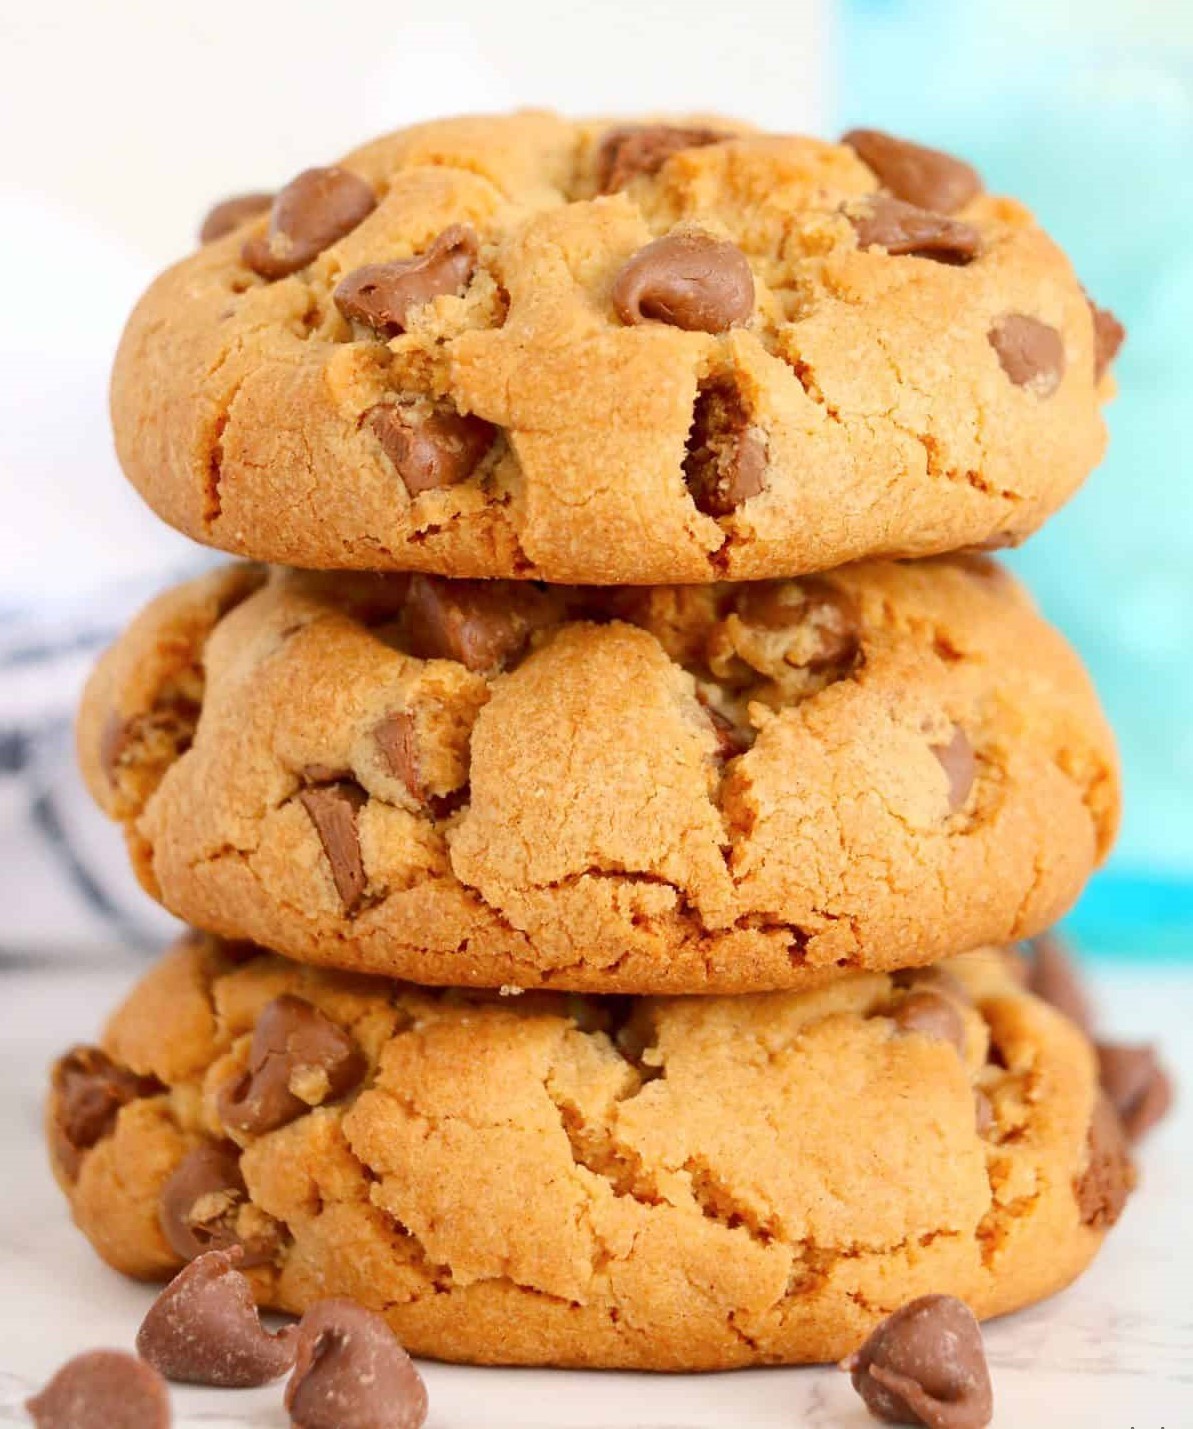 Big Fat Chewy Chocolate Chip Cookies